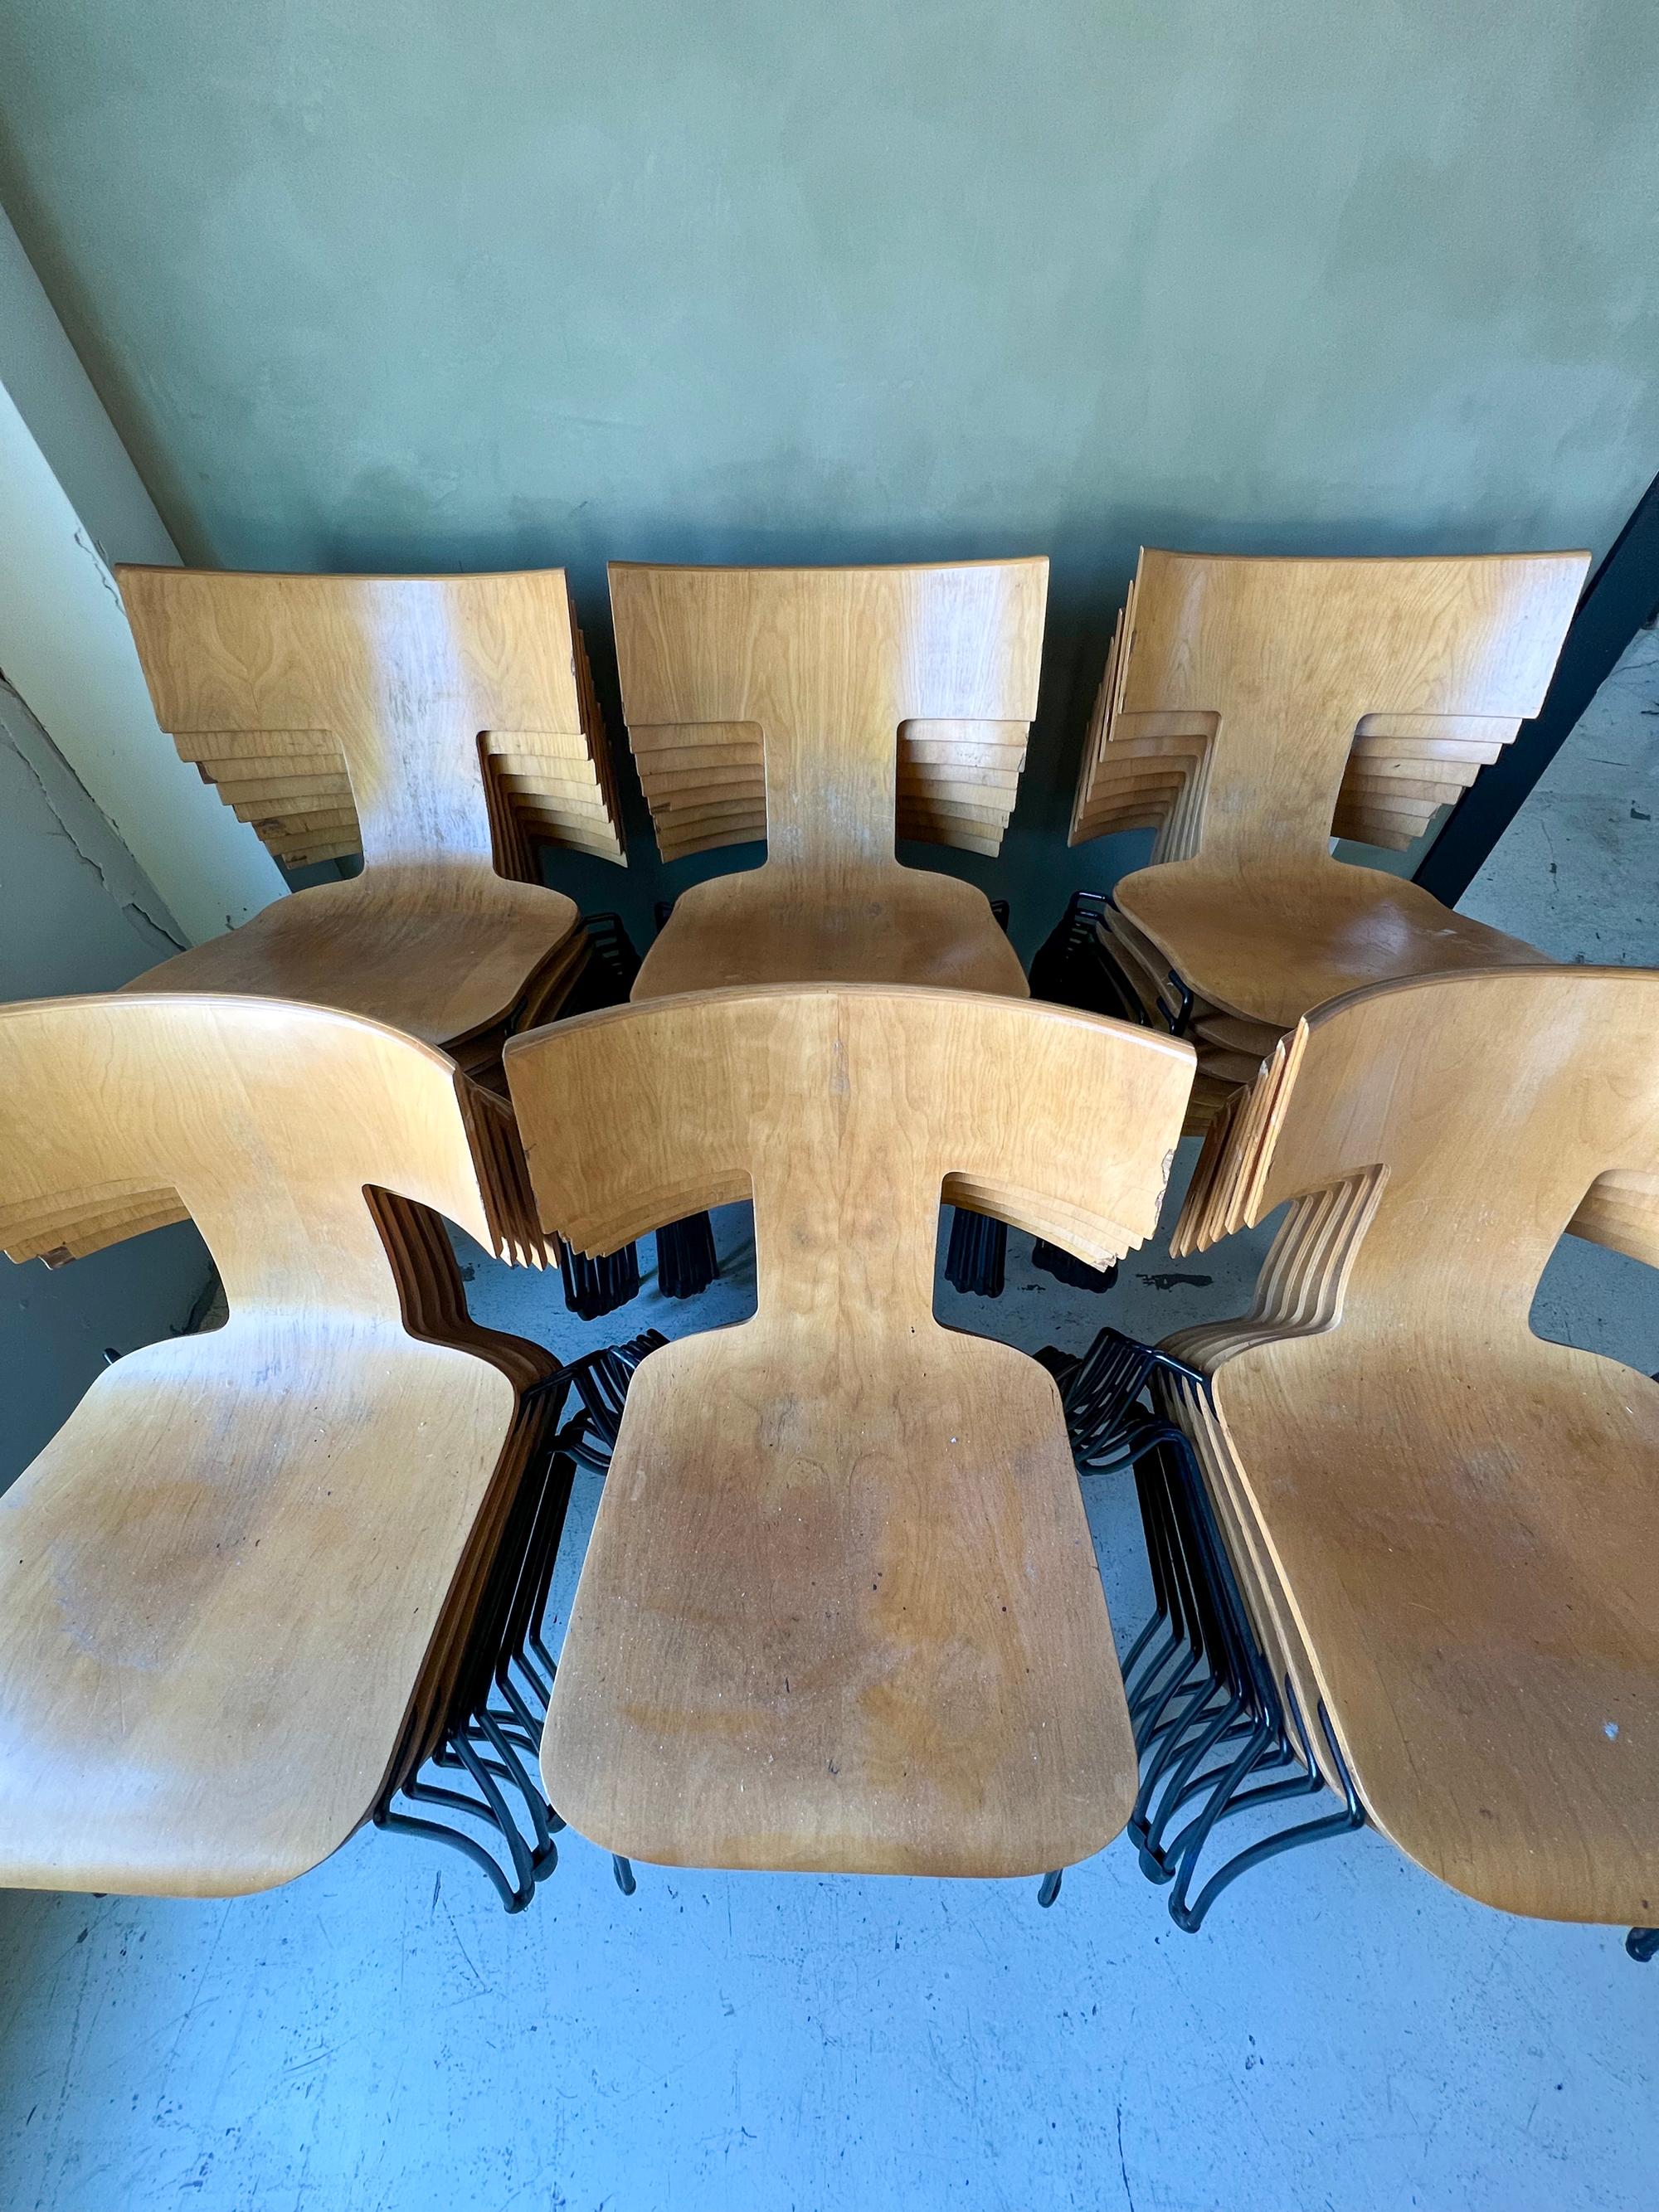 Designed by John Hutton for the American Academy in Rome, the Anziano chair is made of a molded plywood seat and iron base. The chairs are are very comfortable and have a good amount of flex. The chairs all have some chipping in the veneer on the